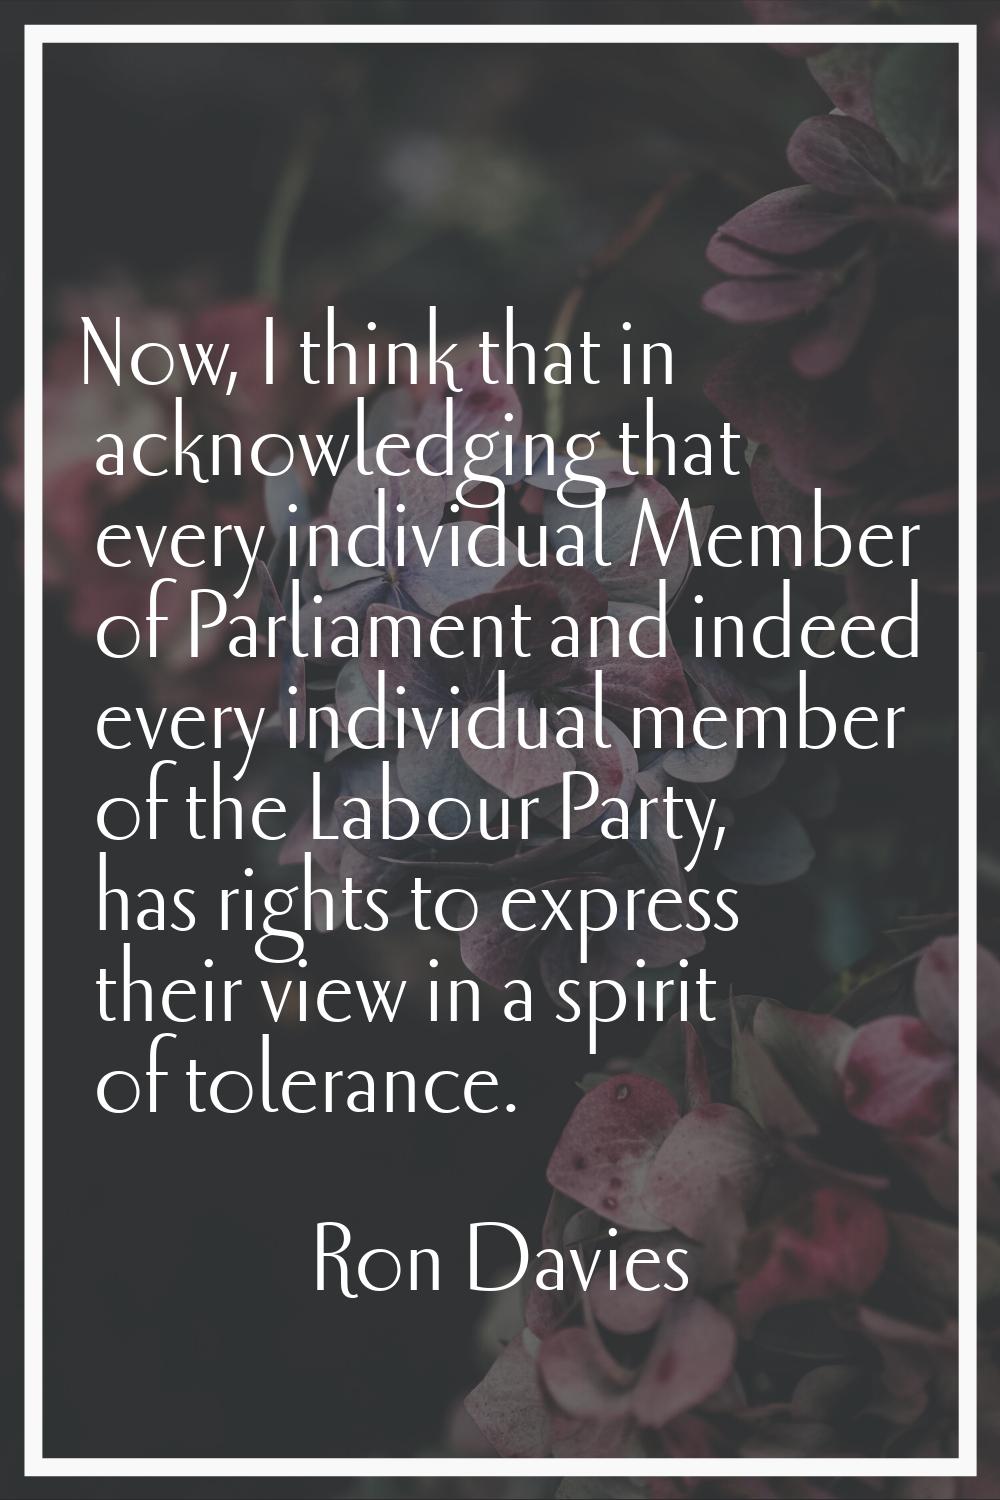 Now, I think that in acknowledging that every individual Member of Parliament and indeed every indi